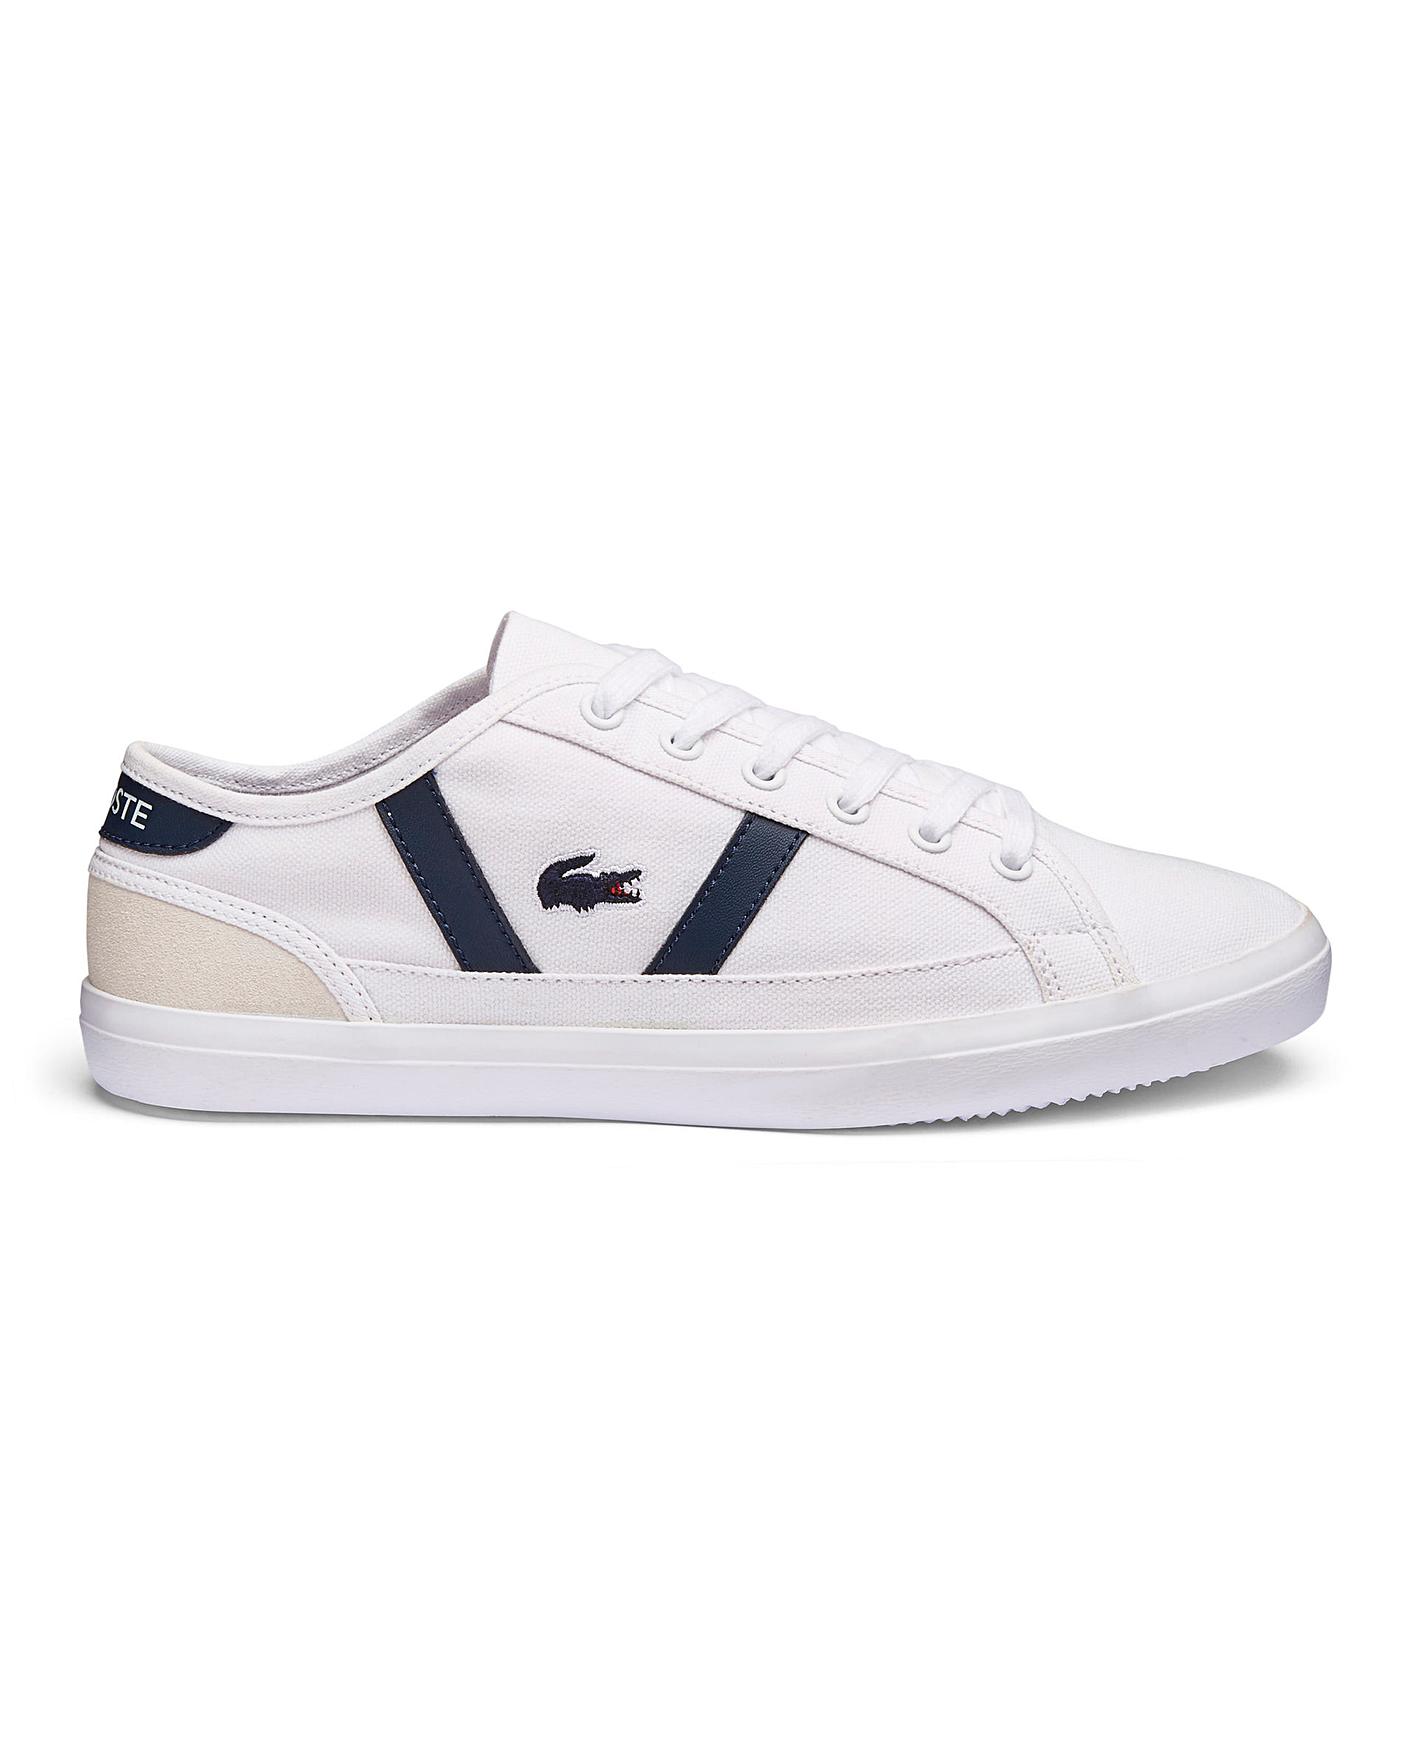 Lacoste Sideline Trainers | J D Williams